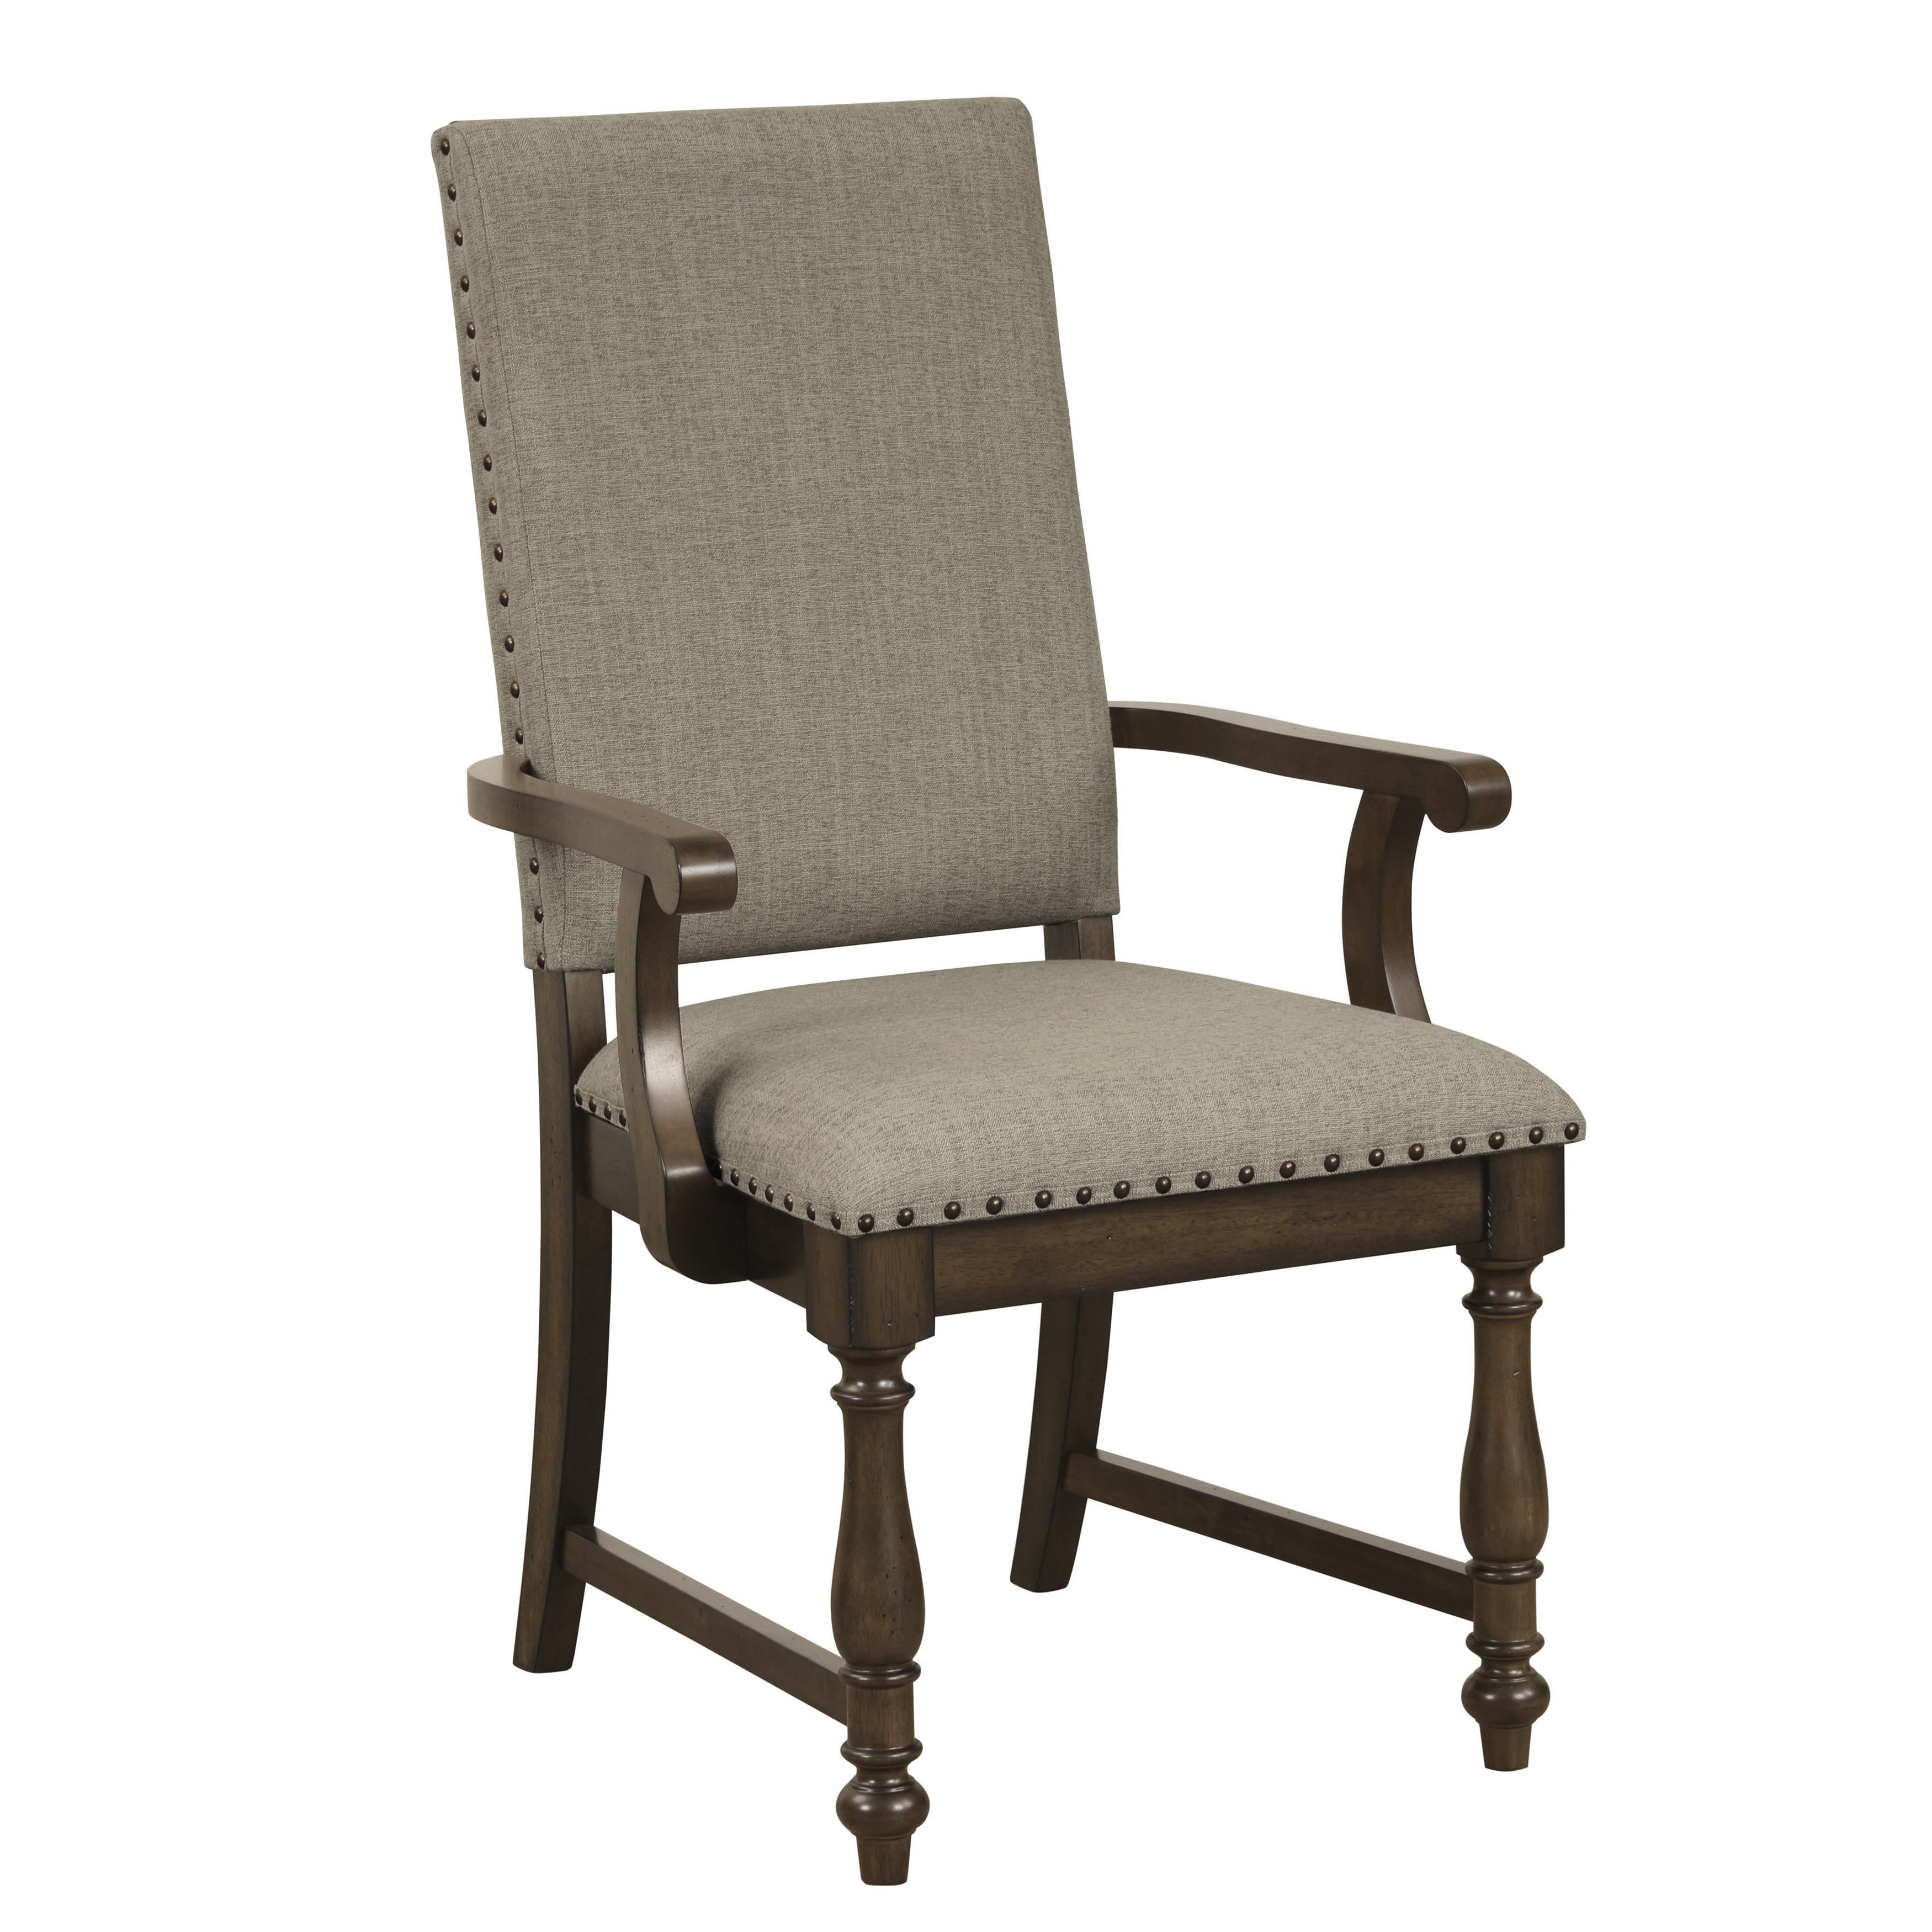 Traditional Arm Chair Set 5703A Stonington 5703A in Brown Polyester